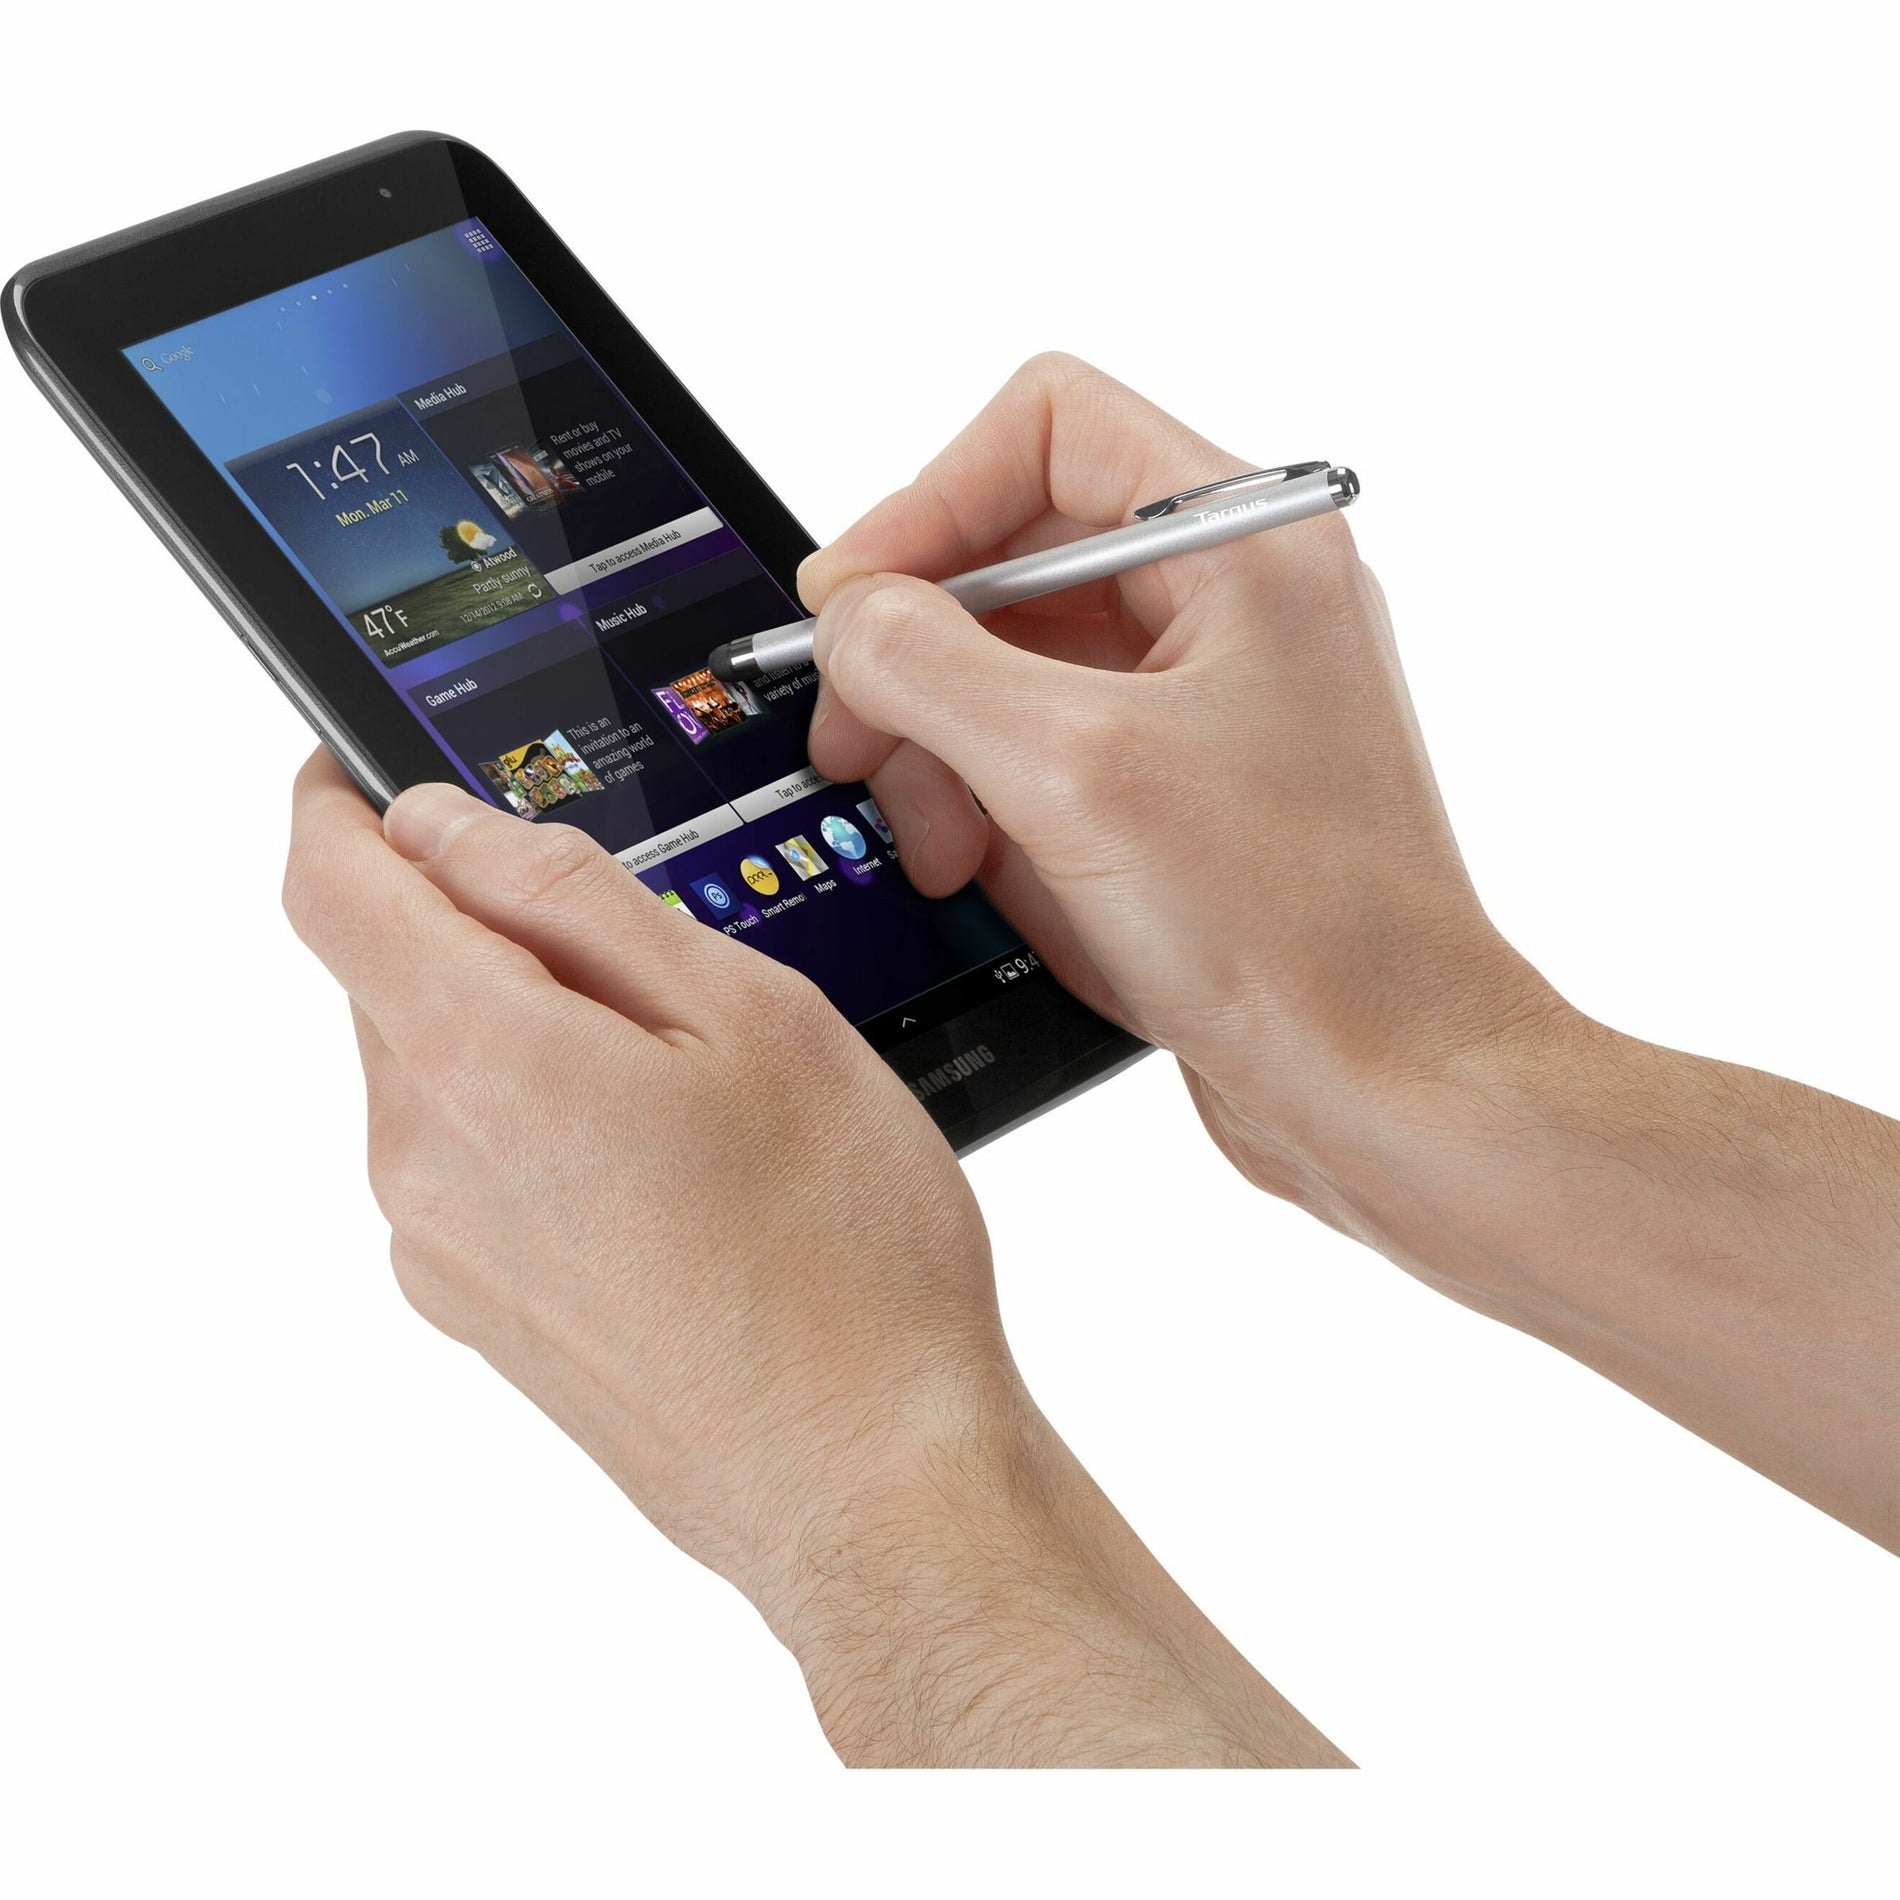 Targus Slim Stylus for Smartphones - Enhance Your Touchscreen Experience [Discontinued]